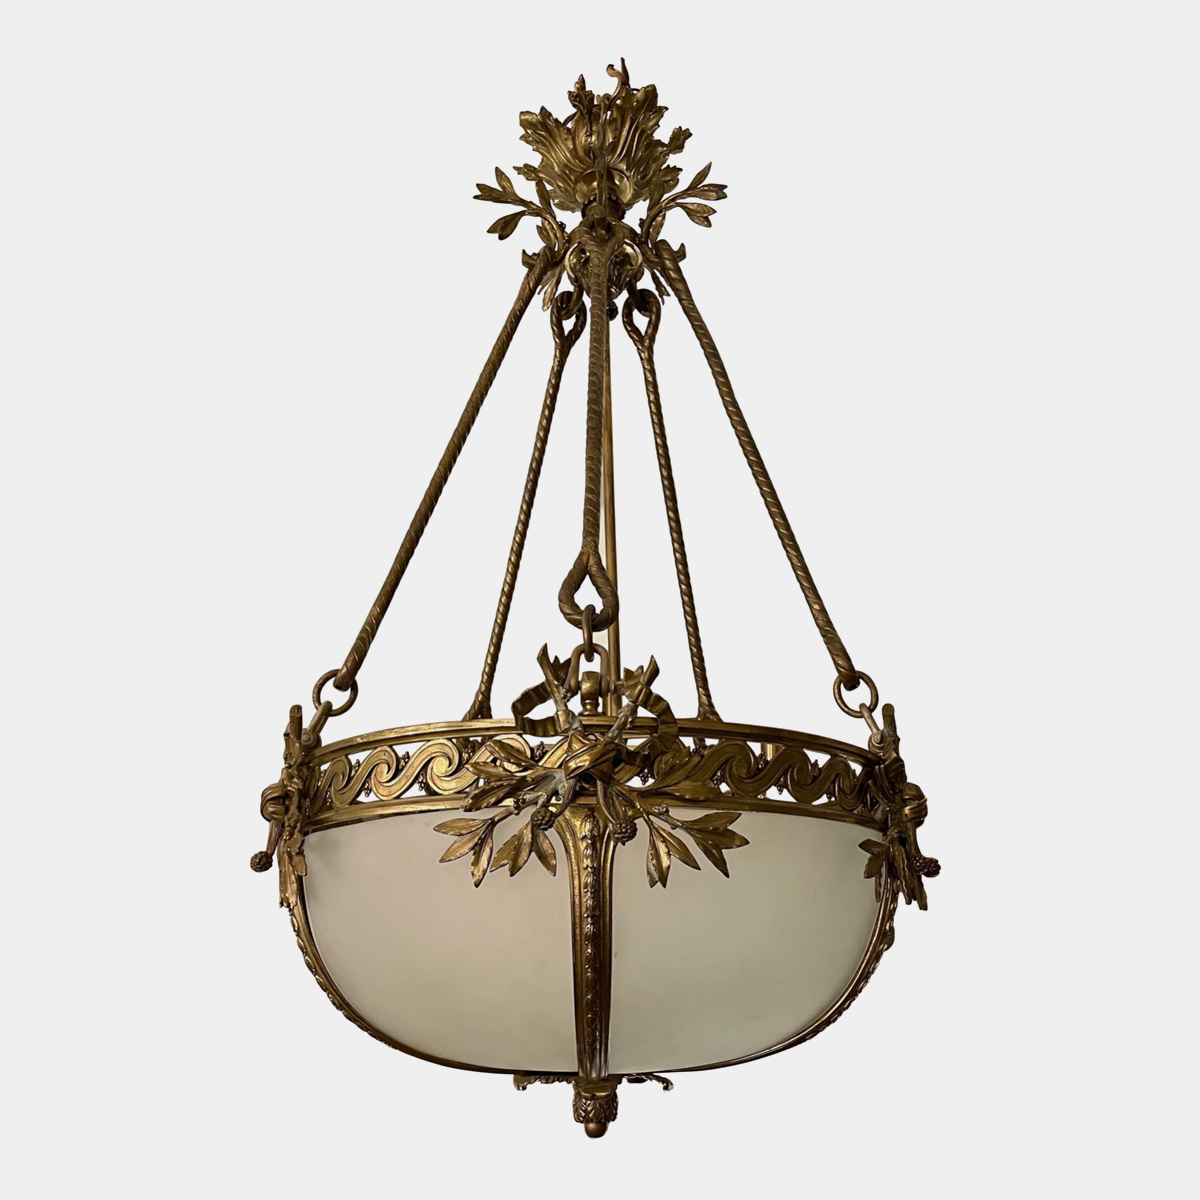 A Large Gilt Bronze French Empire Style Chandelier